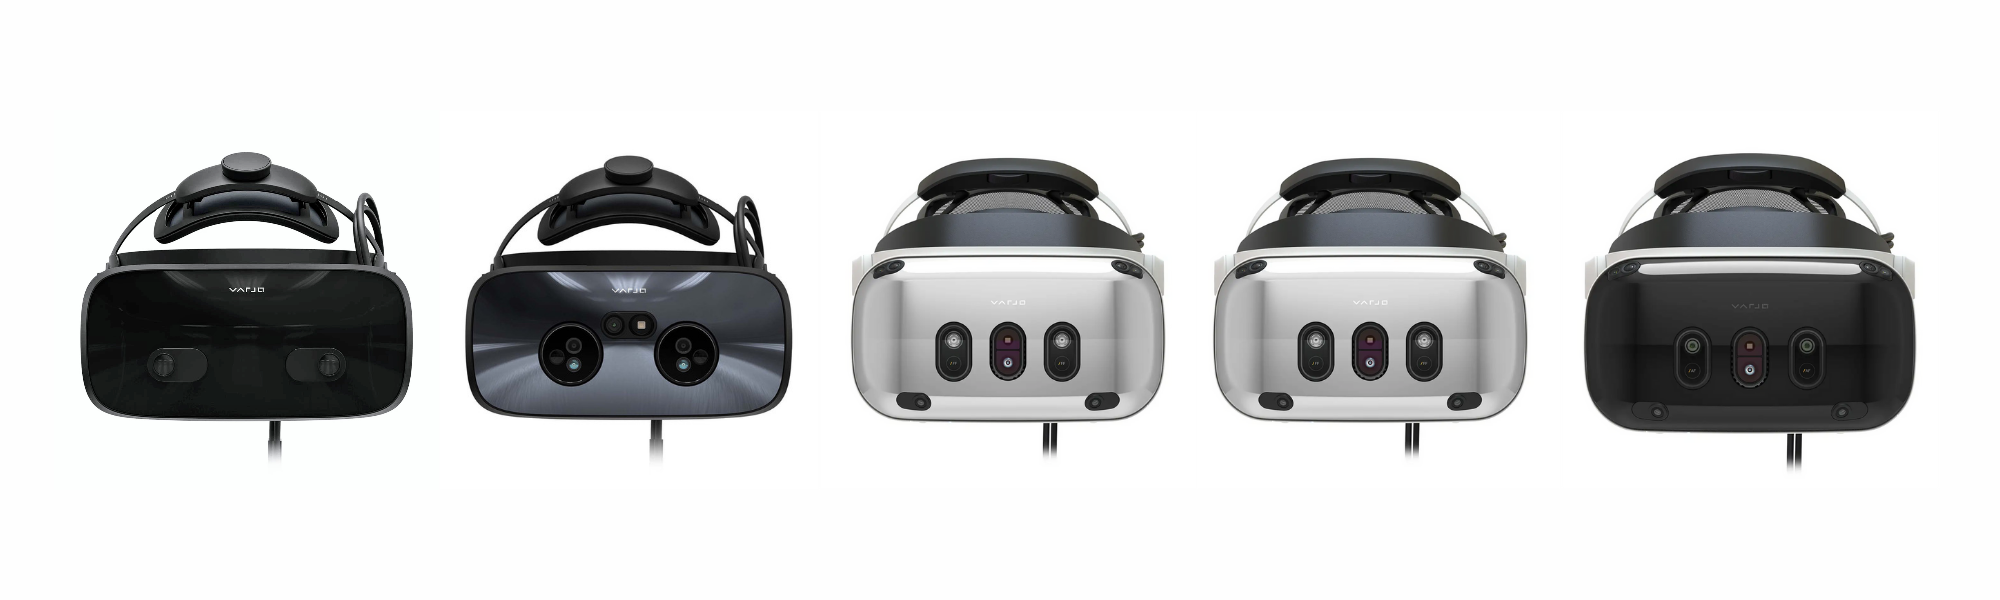 Varjo's New Pricing and Advanced Features for XR-3 & VR-3 Headsets